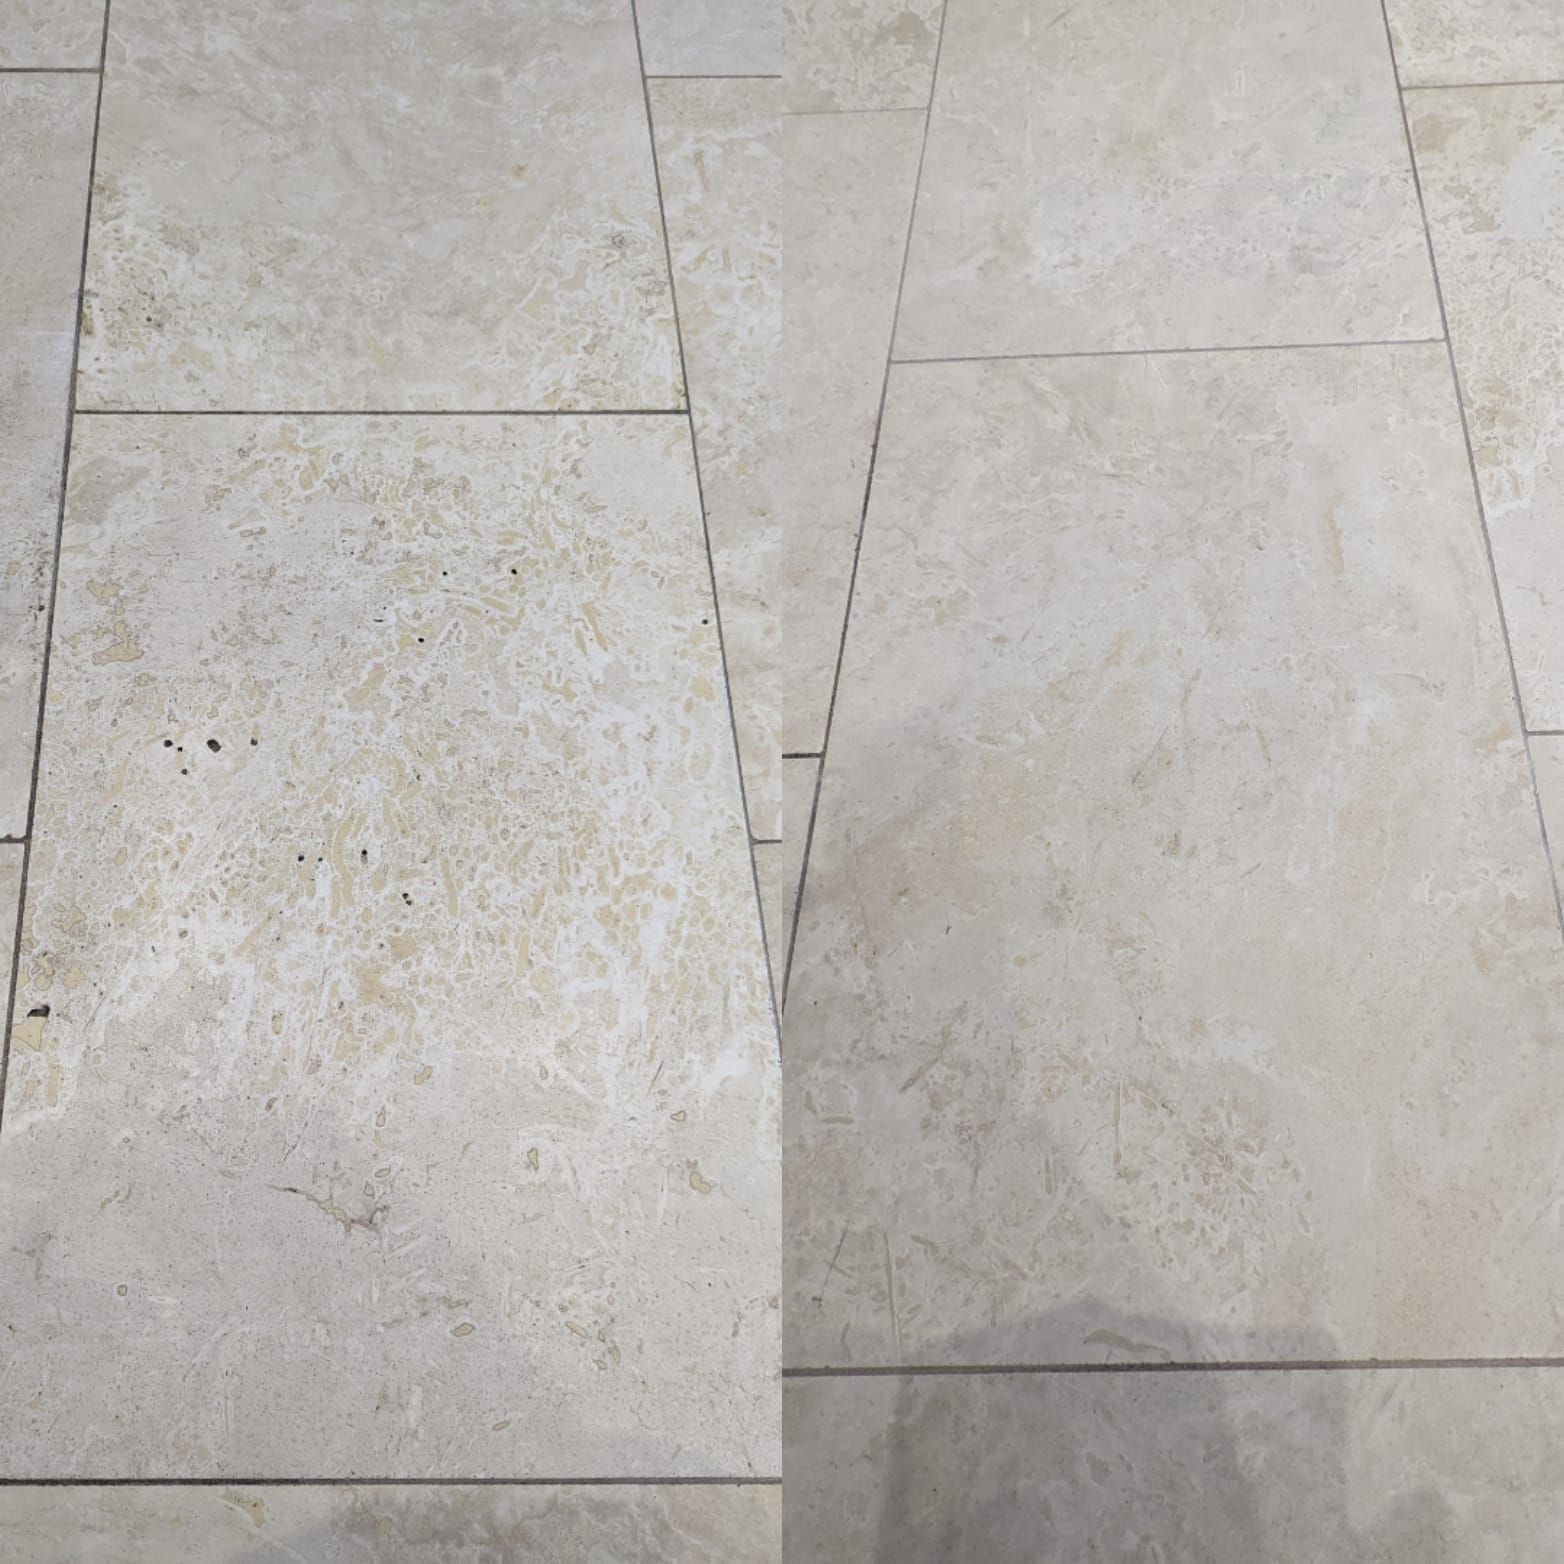 Limestone travertine deep cleaning, polishing, sealing and grout cleaning in Greater Manchester. Filling in holes with a resin filler.